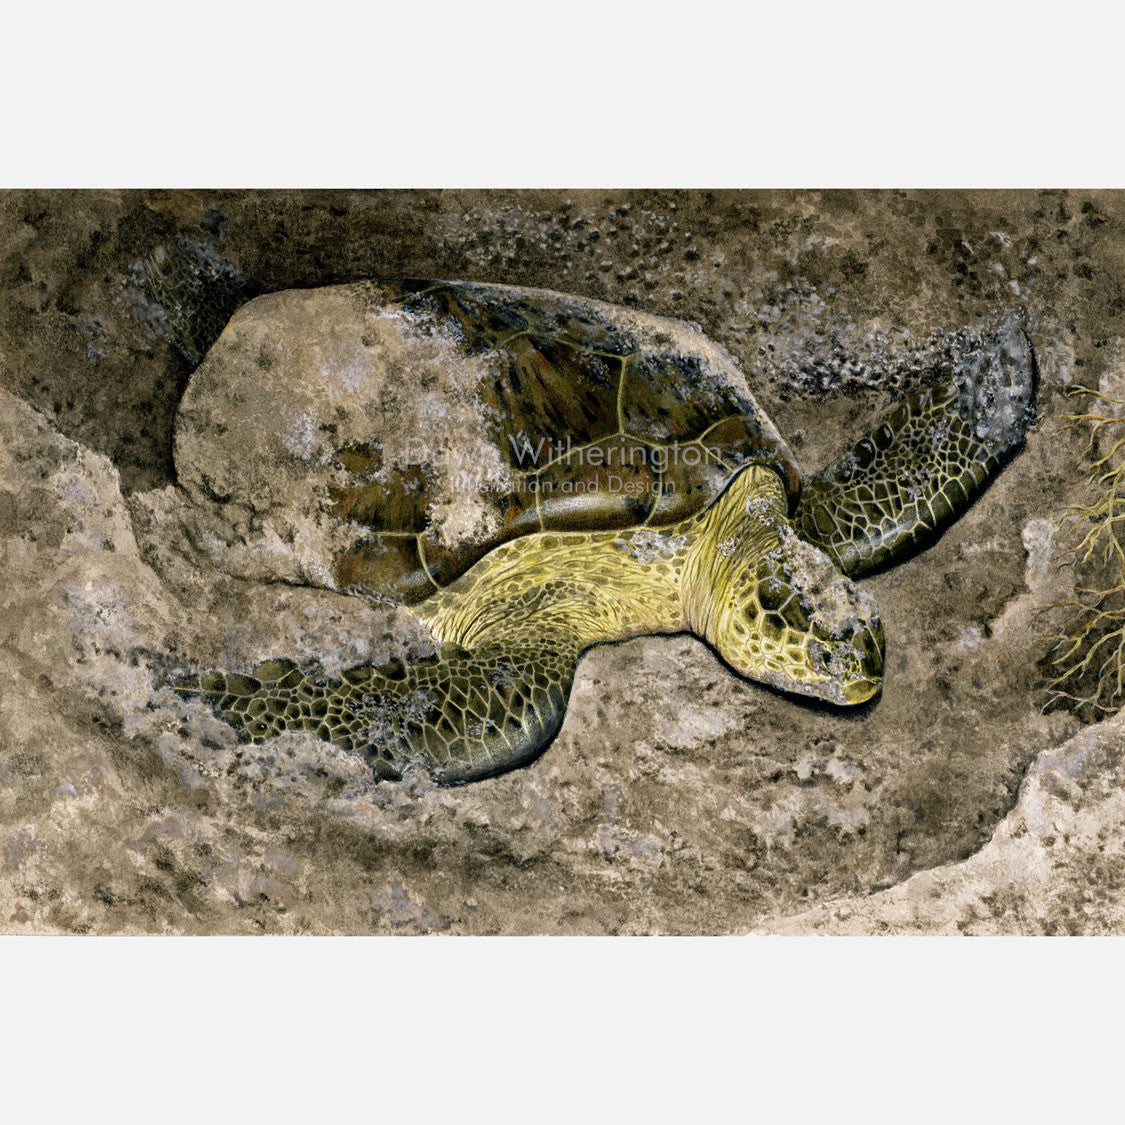 This beautiful illustration is of a nesting green turtle, Chelonia mydas, on a Florida beach.